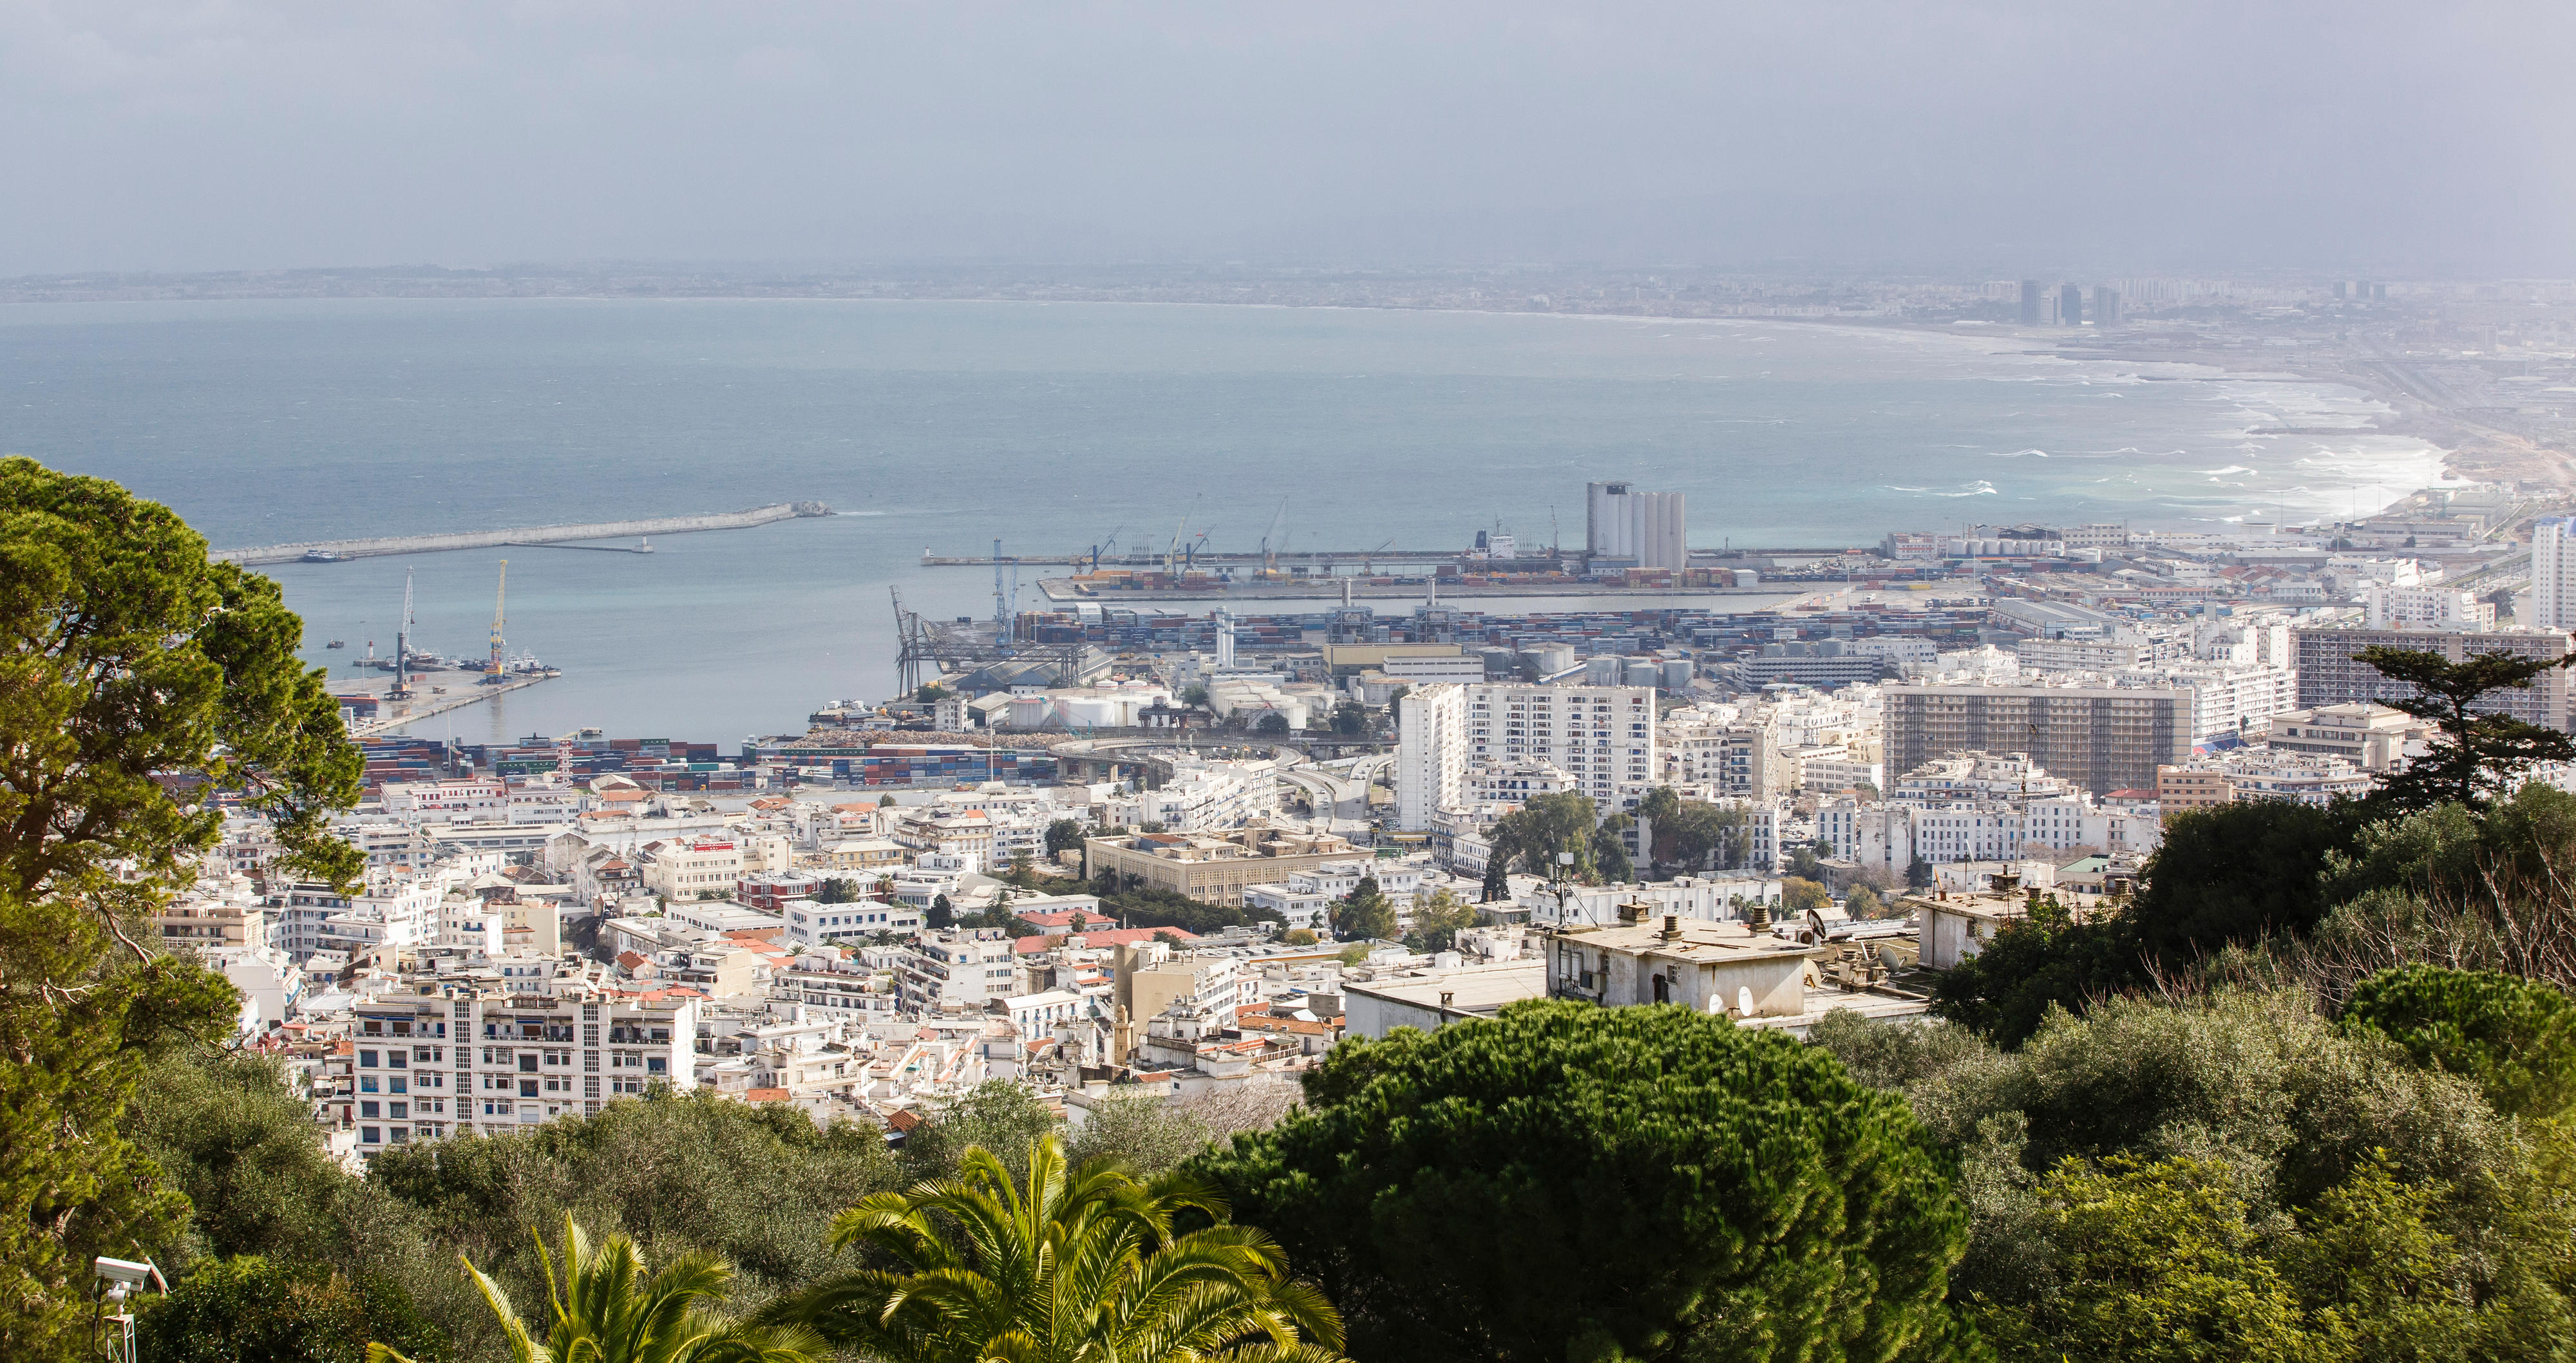 View of the Algerian capital Algiers